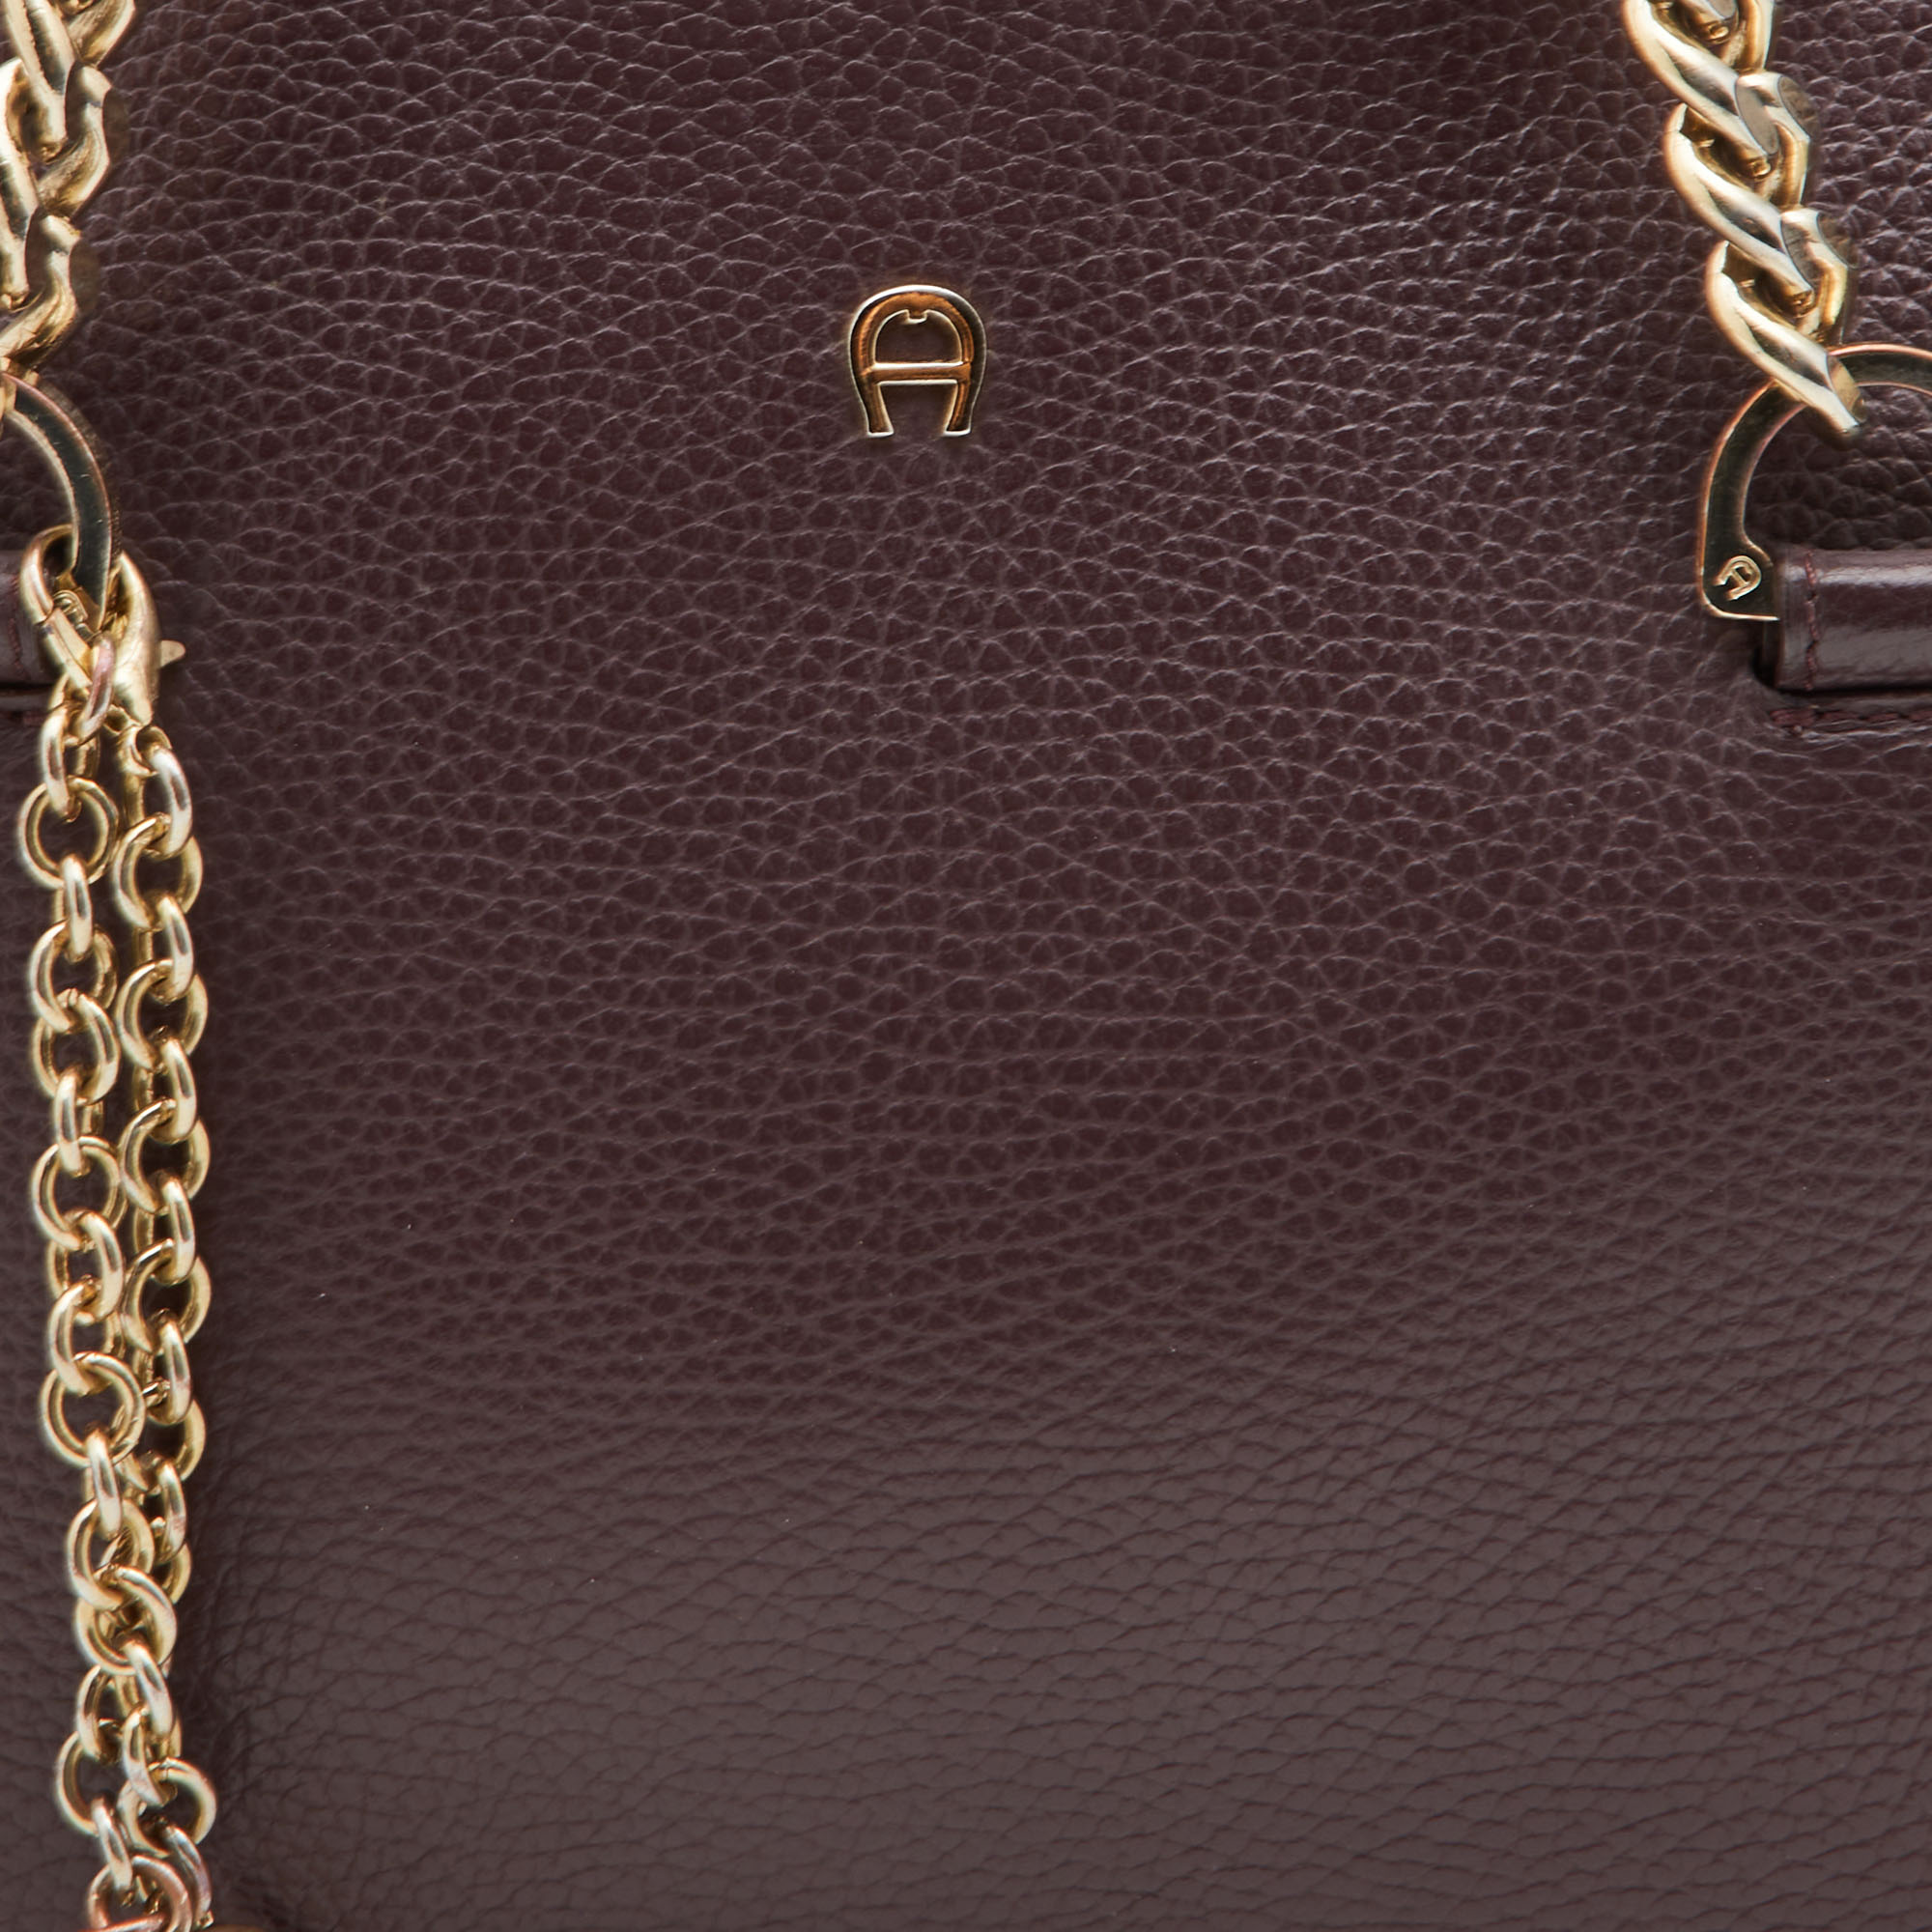 Aigner Burgundy Leather Chain Tote